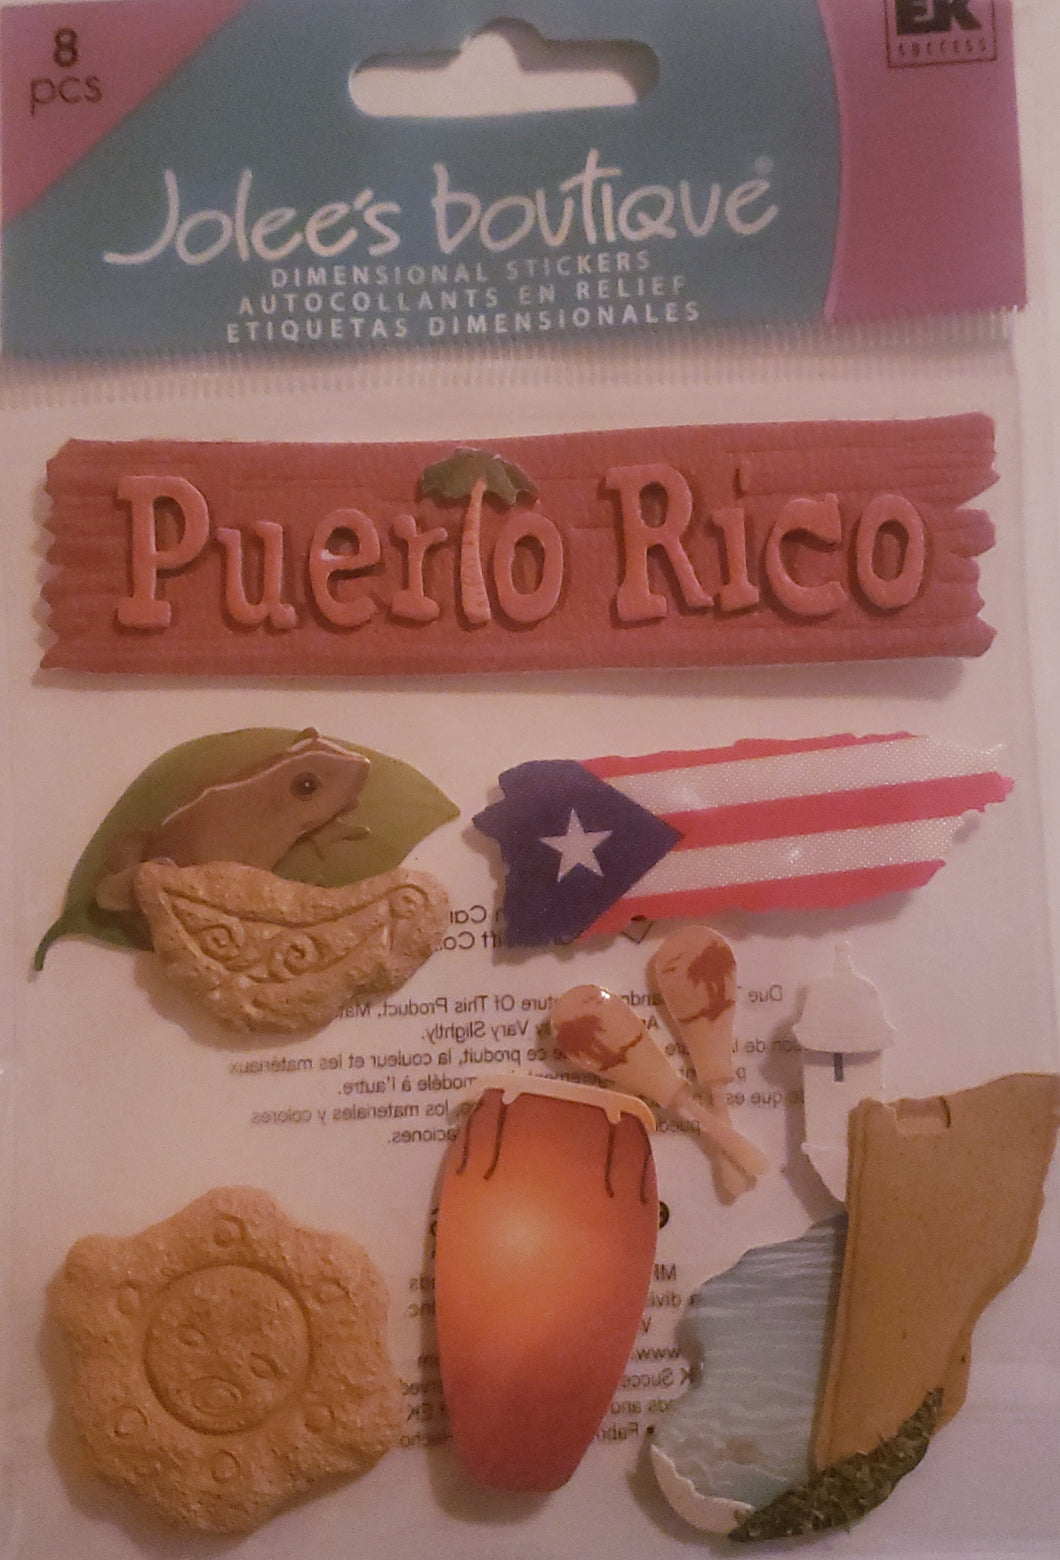 Jolee's Boutique Dimensional Sticker  - small pack country - Puerto Rico